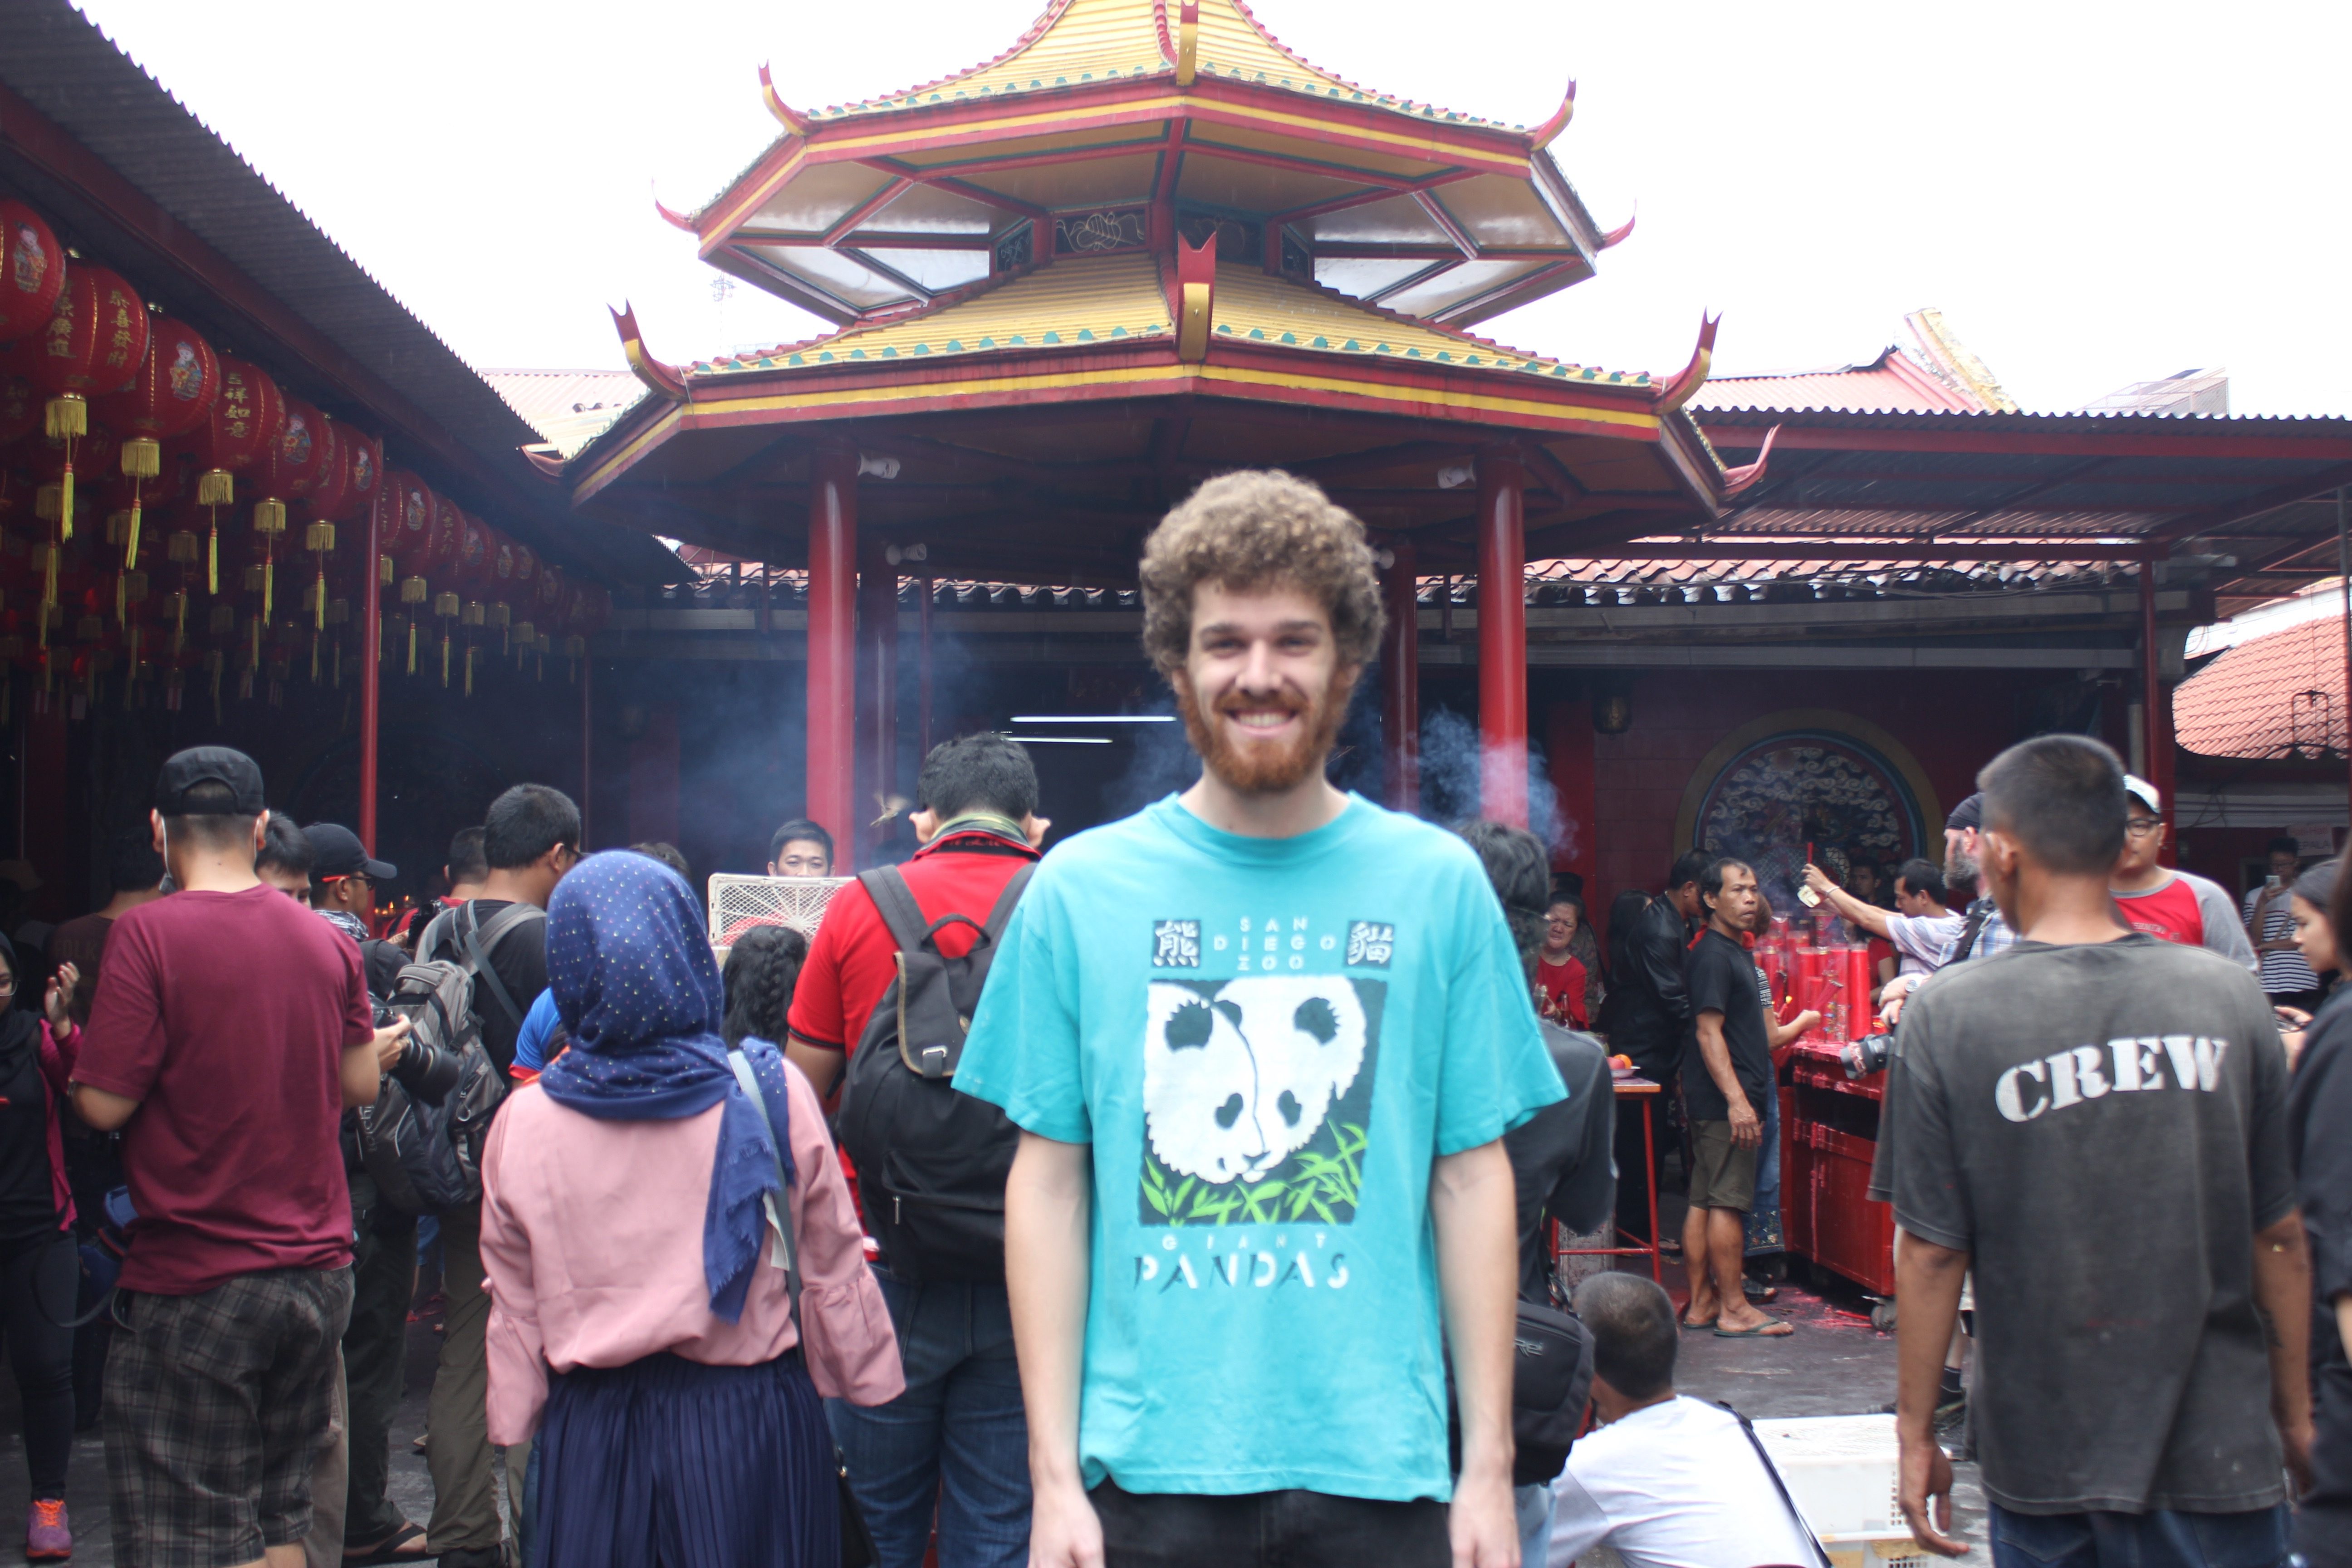 NEW YEAR. American Andrew Masters, 28 is visiting Indonesia after working in Vietnam as an English teacher. 'As an American I have a lot of negativity floating around in me right now so my hope is that everything gets better – I hope so.' Photo by Han Nguyen

 